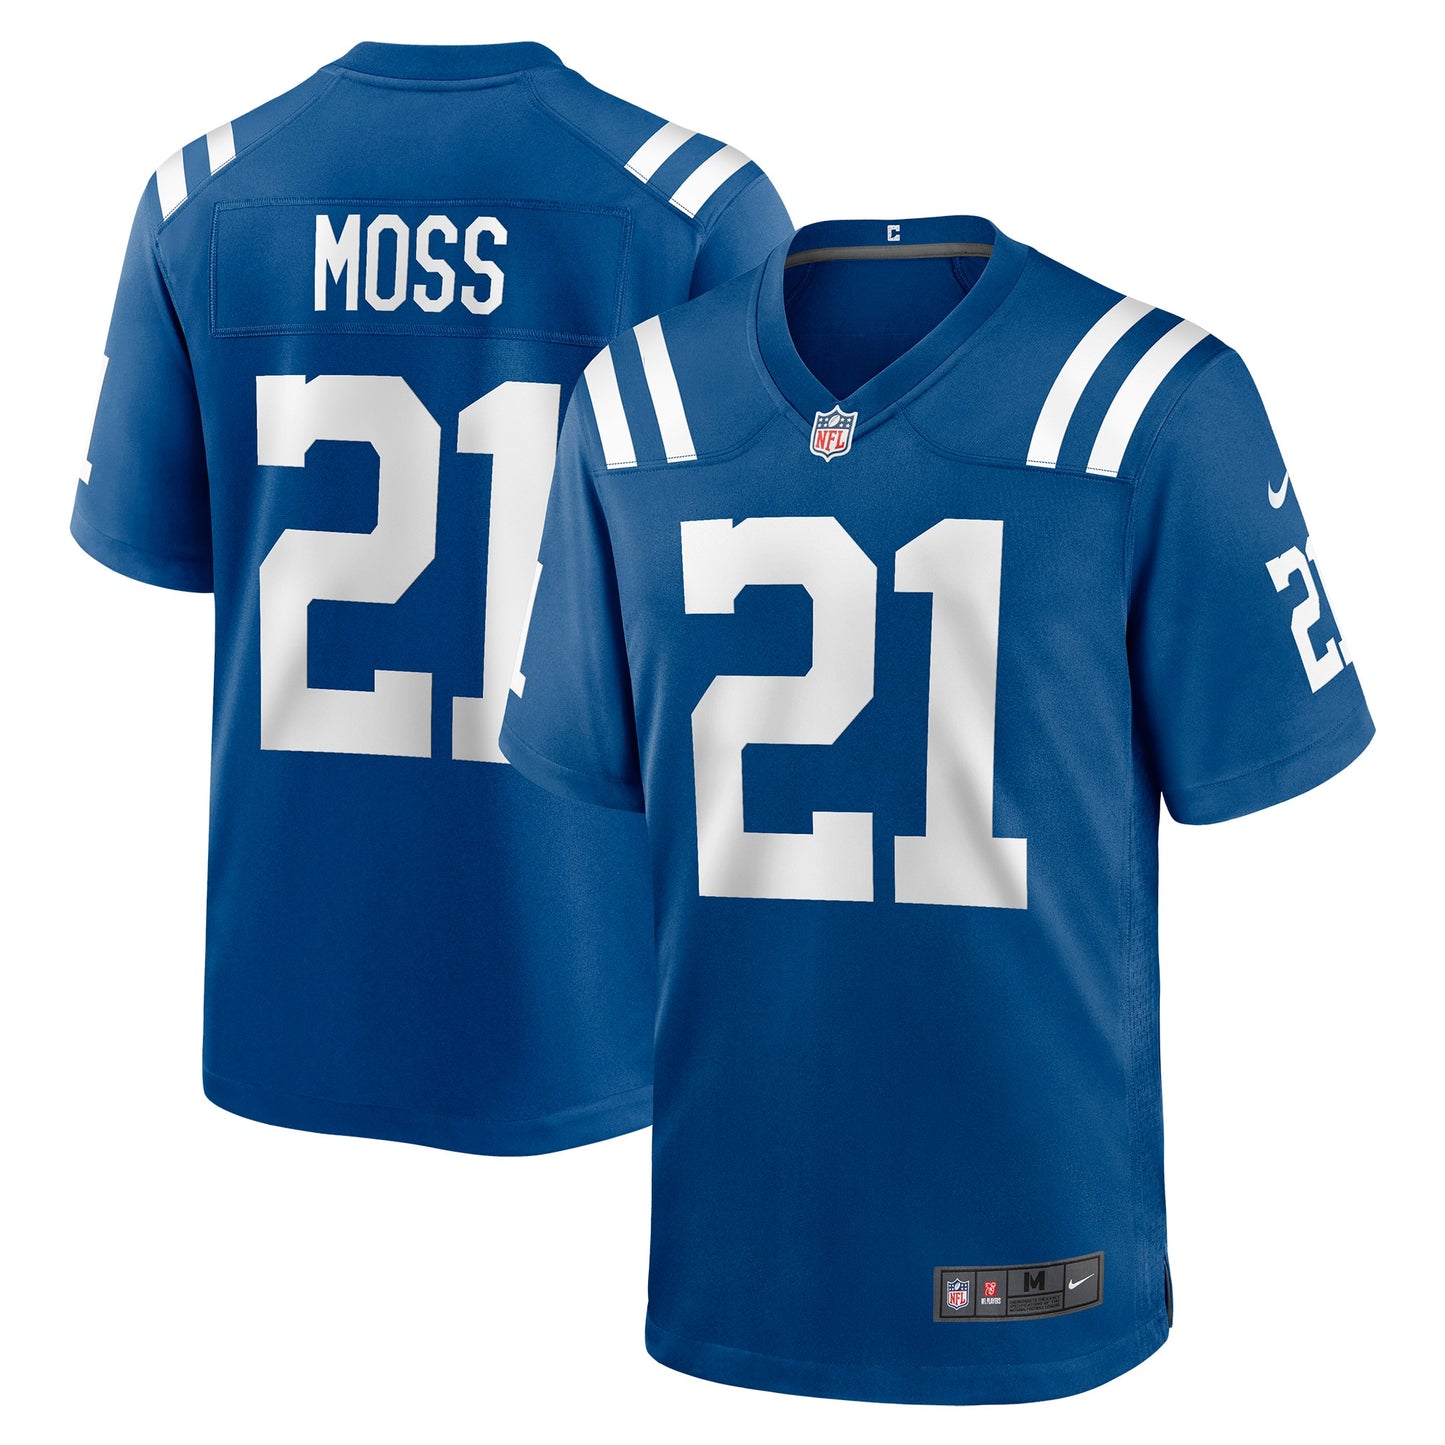 Zack Moss Indianapolis Colts Nike Game Player Jersey - Royal